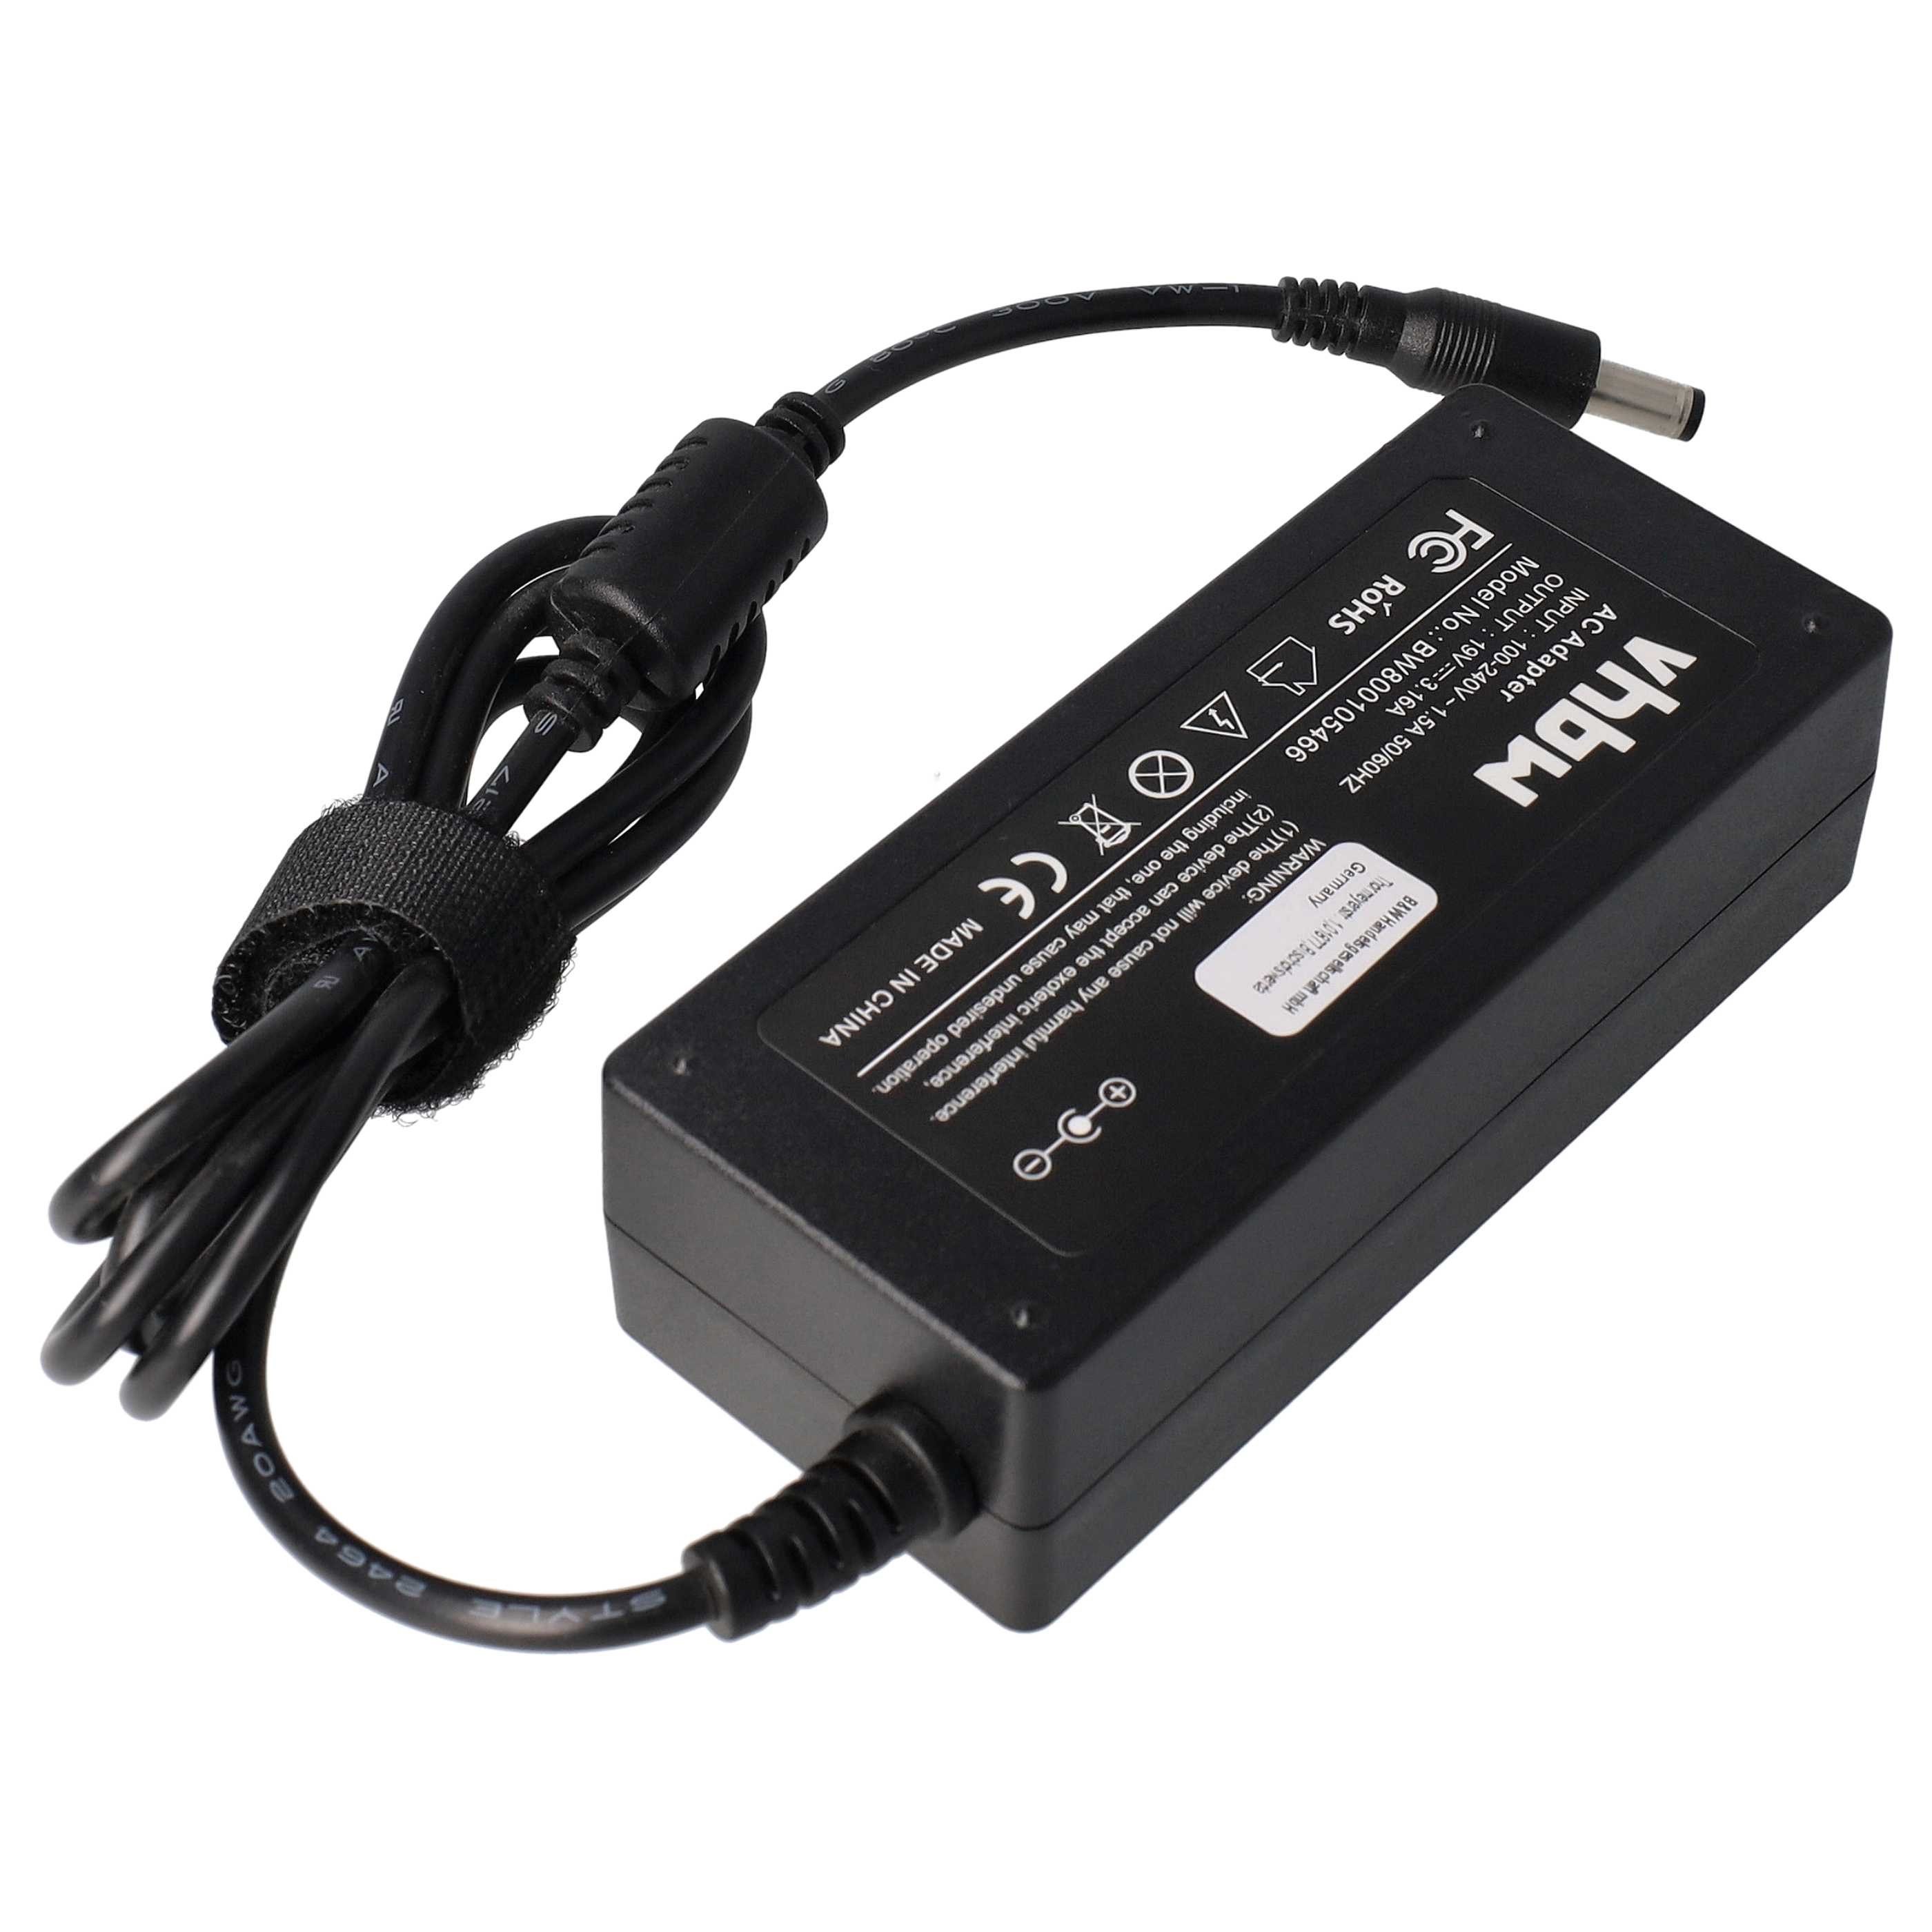 Alimentatore sostituisce Acer PA-1600-02, 25.10135.011, 25.10064.041, 25.10068.121 per notebook Acer , 60 W